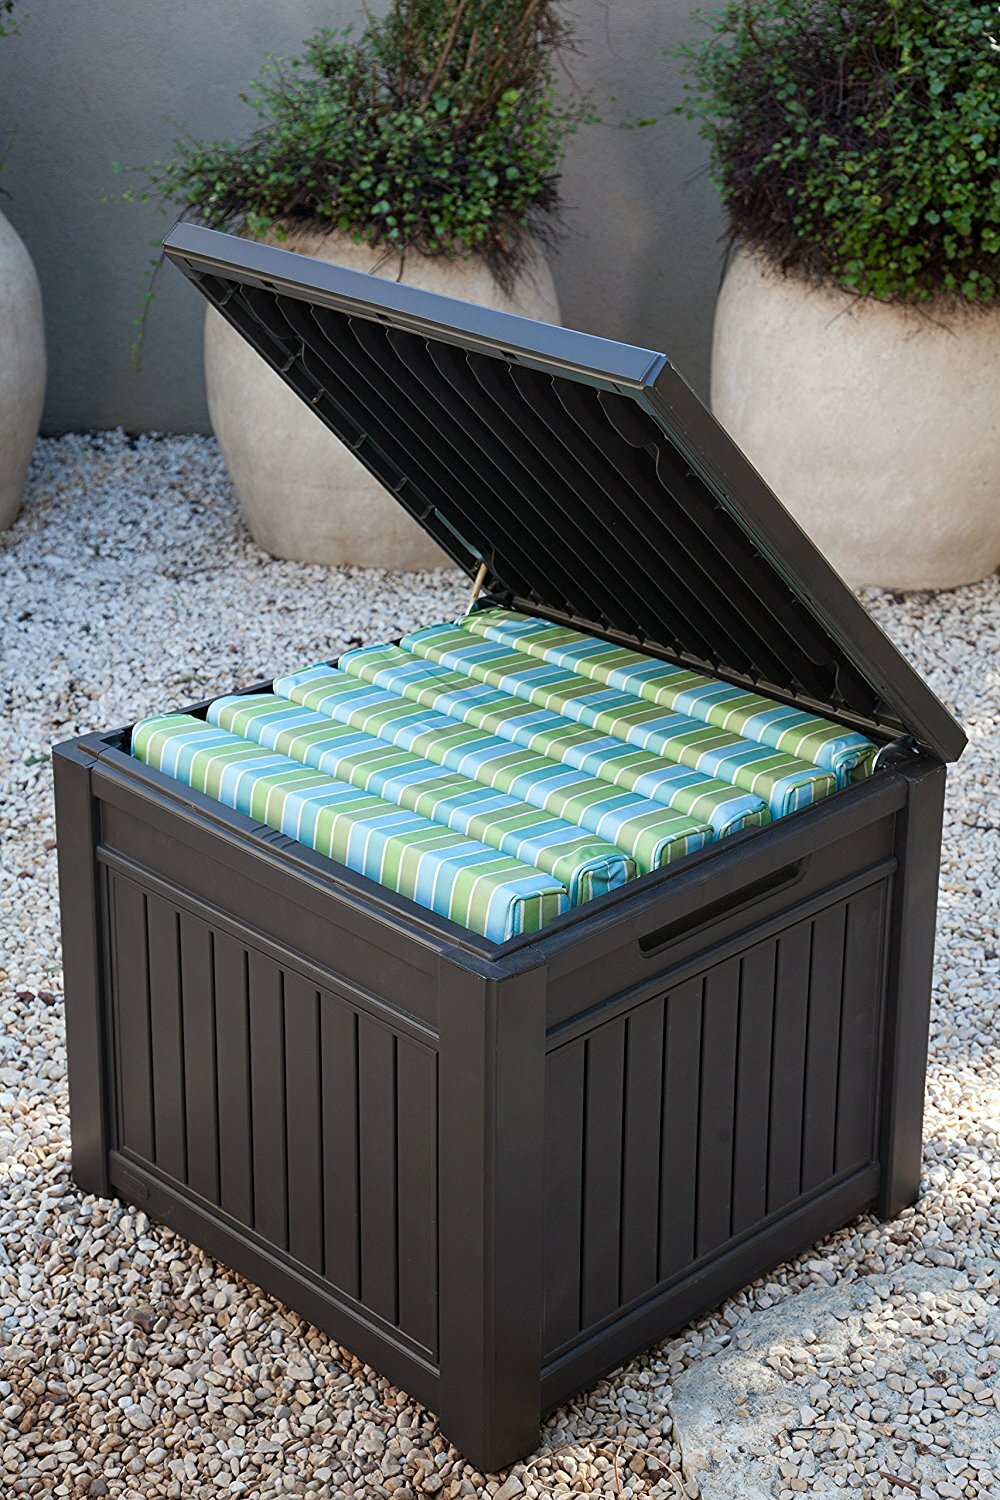 Suncast Small Deck Box | Deck Box With Seat | Rubbermaid Storage Bench